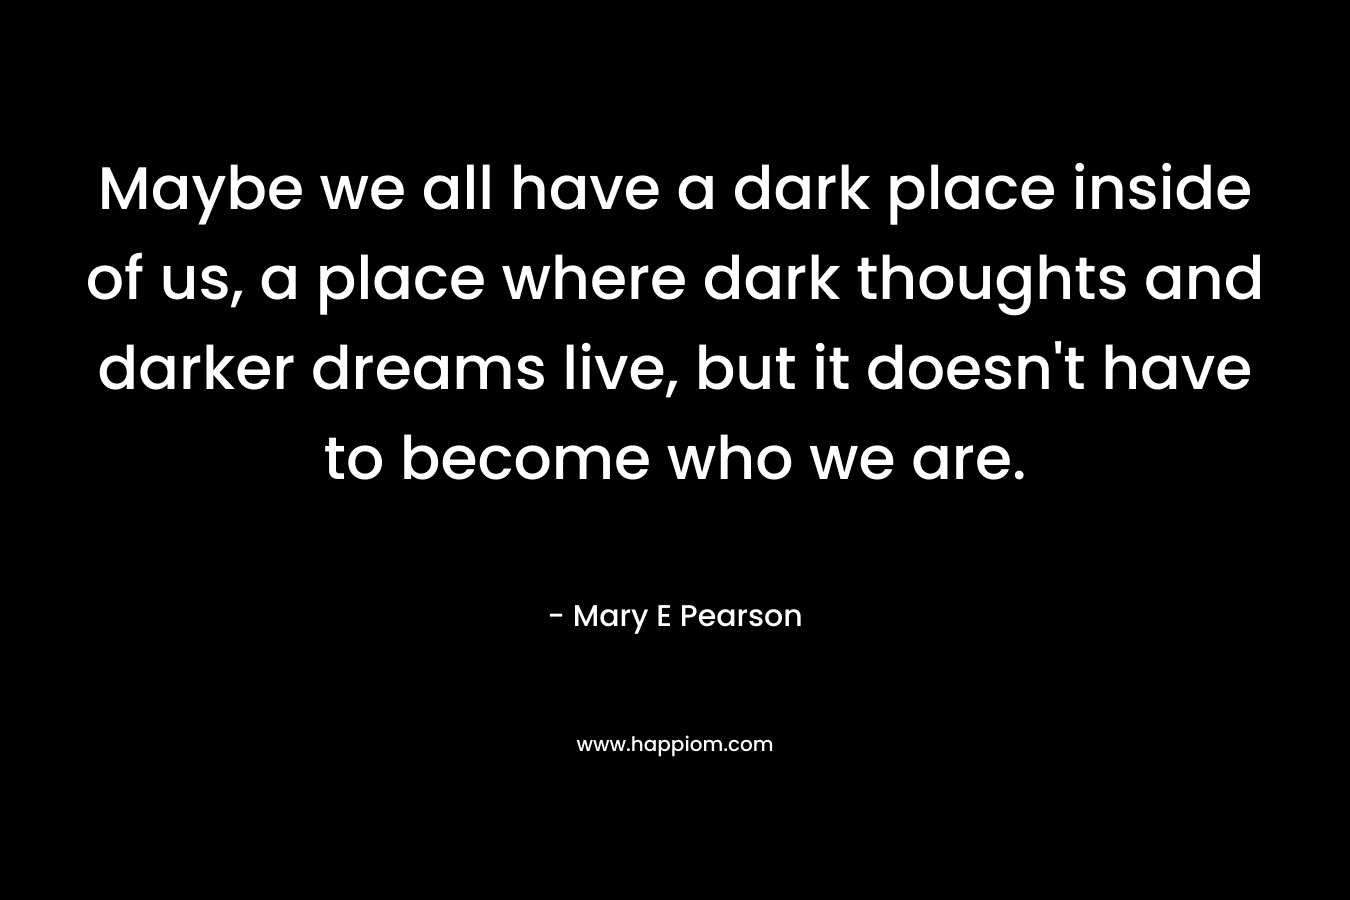 Maybe we all have a dark place inside of us, a place where dark thoughts and darker dreams live, but it doesn't have to become who we are.